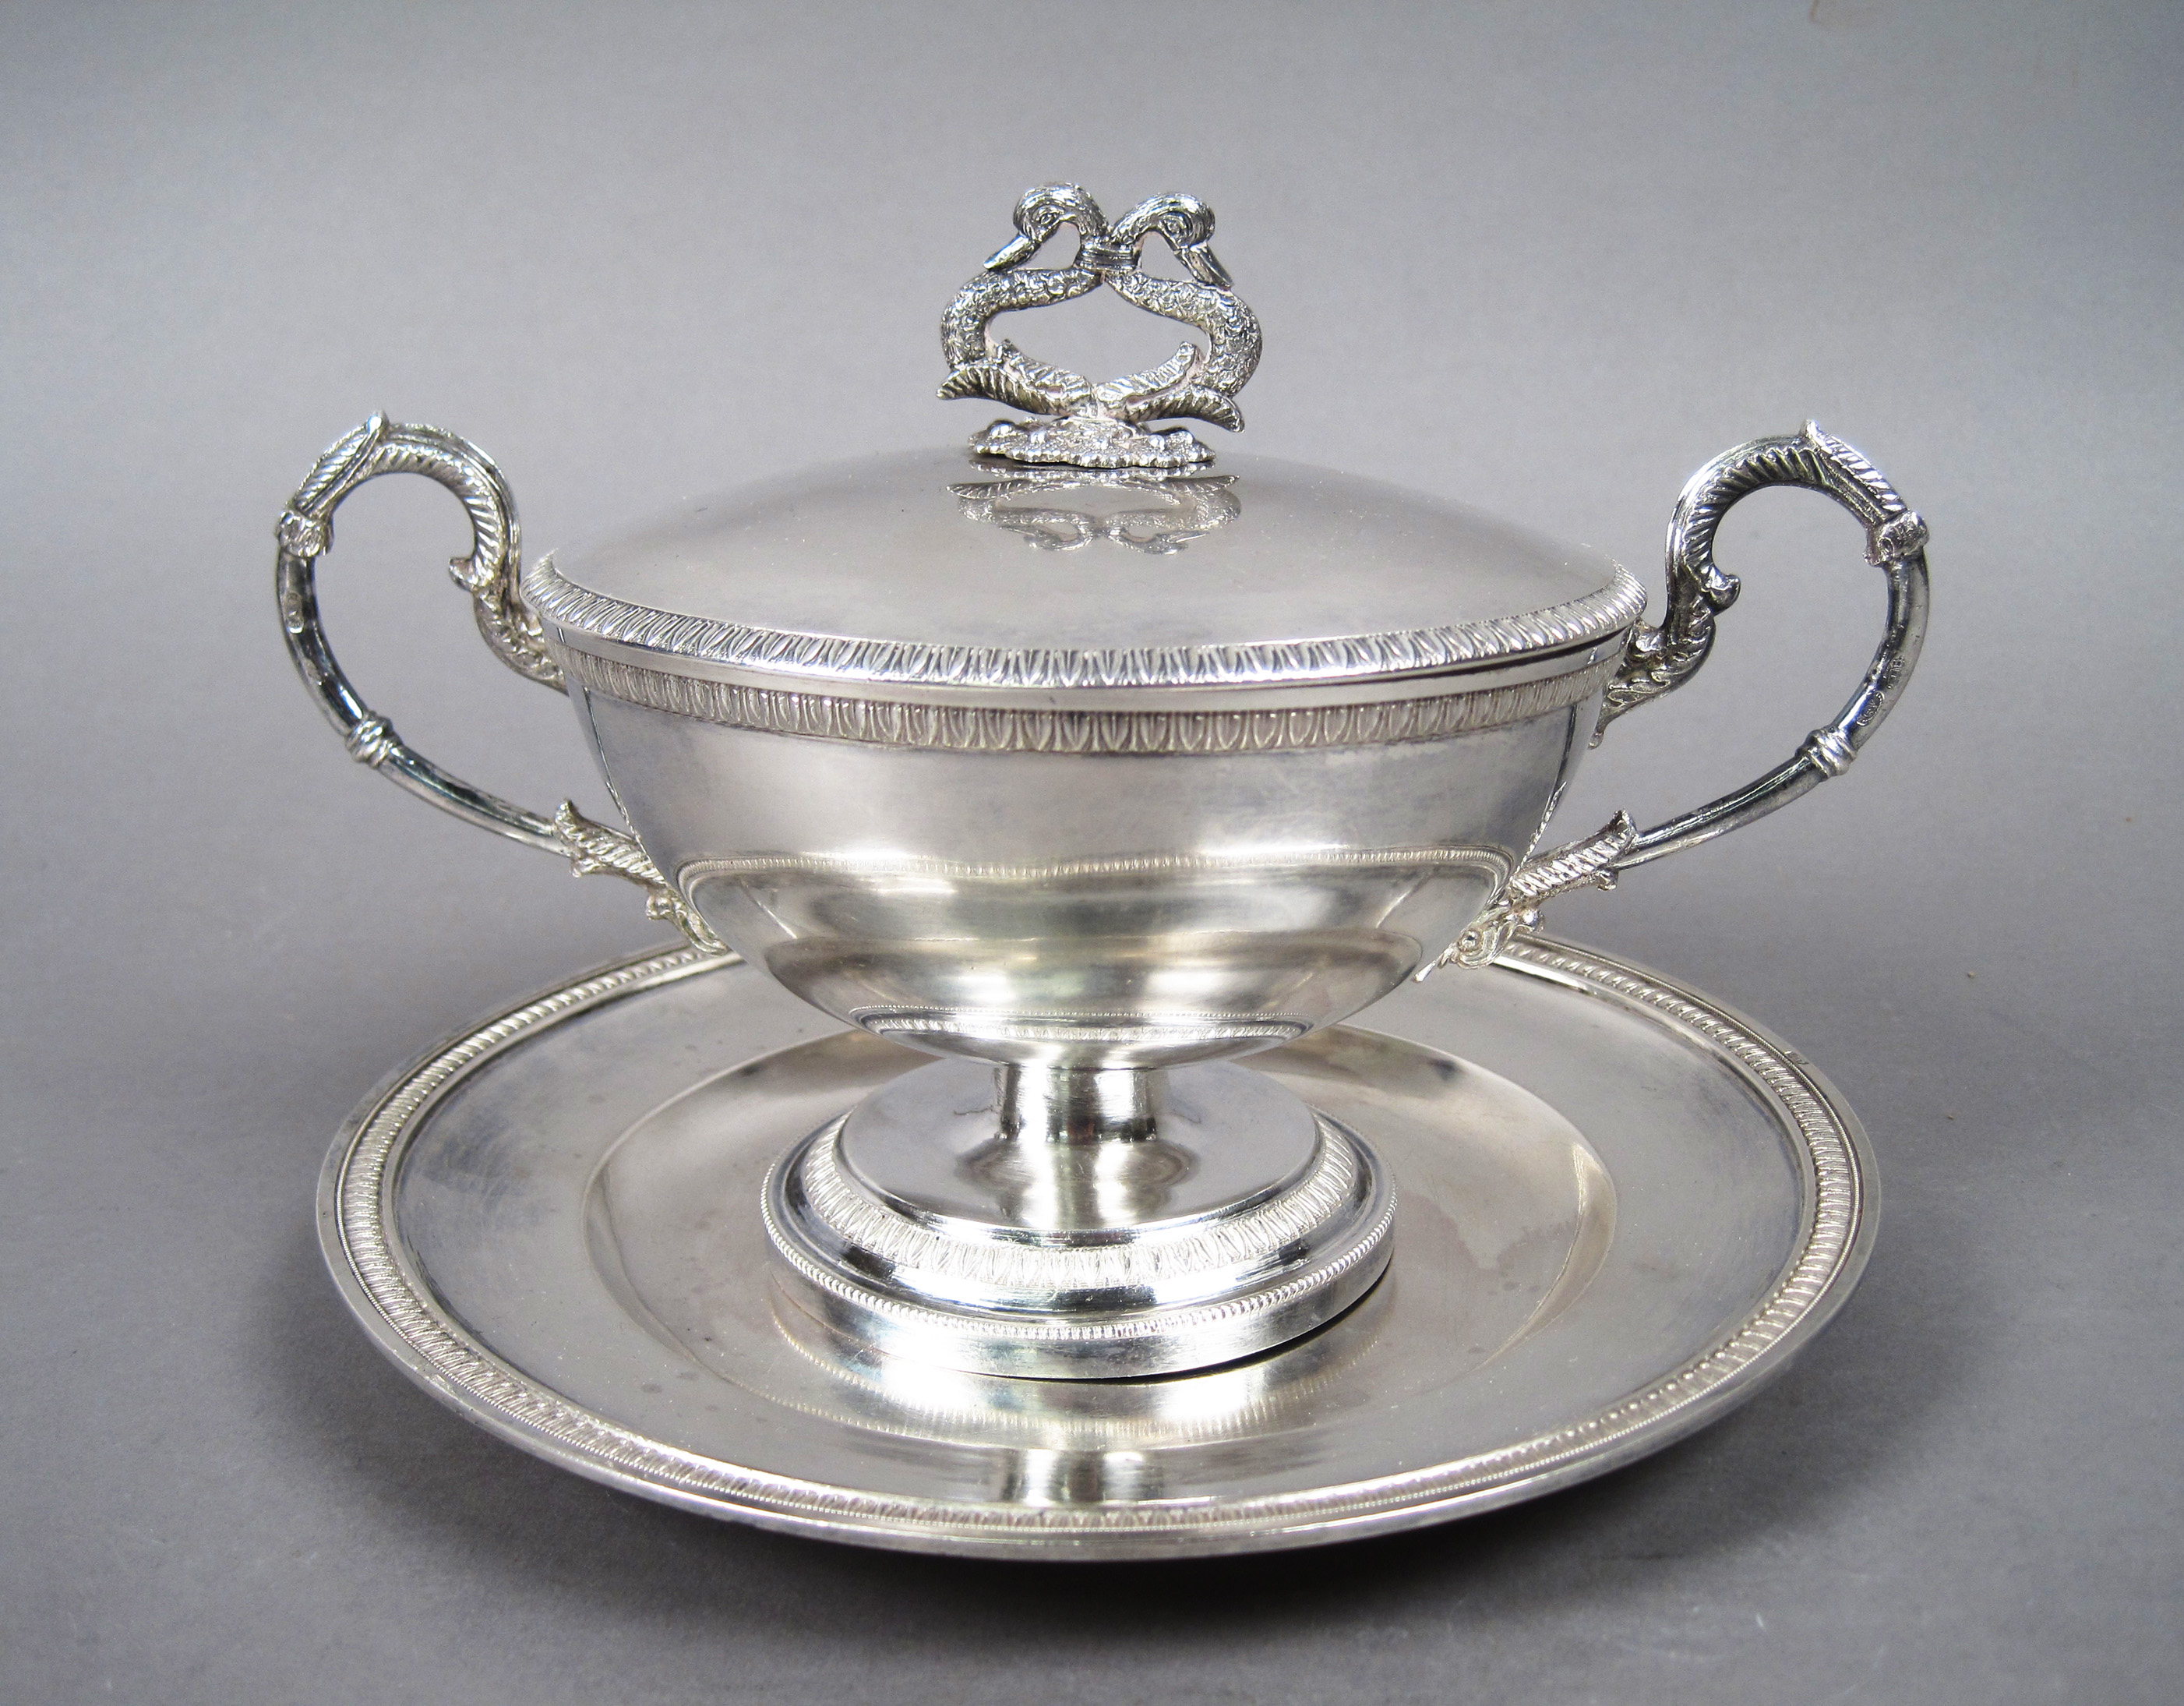 Antique Sterling Silver Covered Dish with Figural Swan Neck Handle